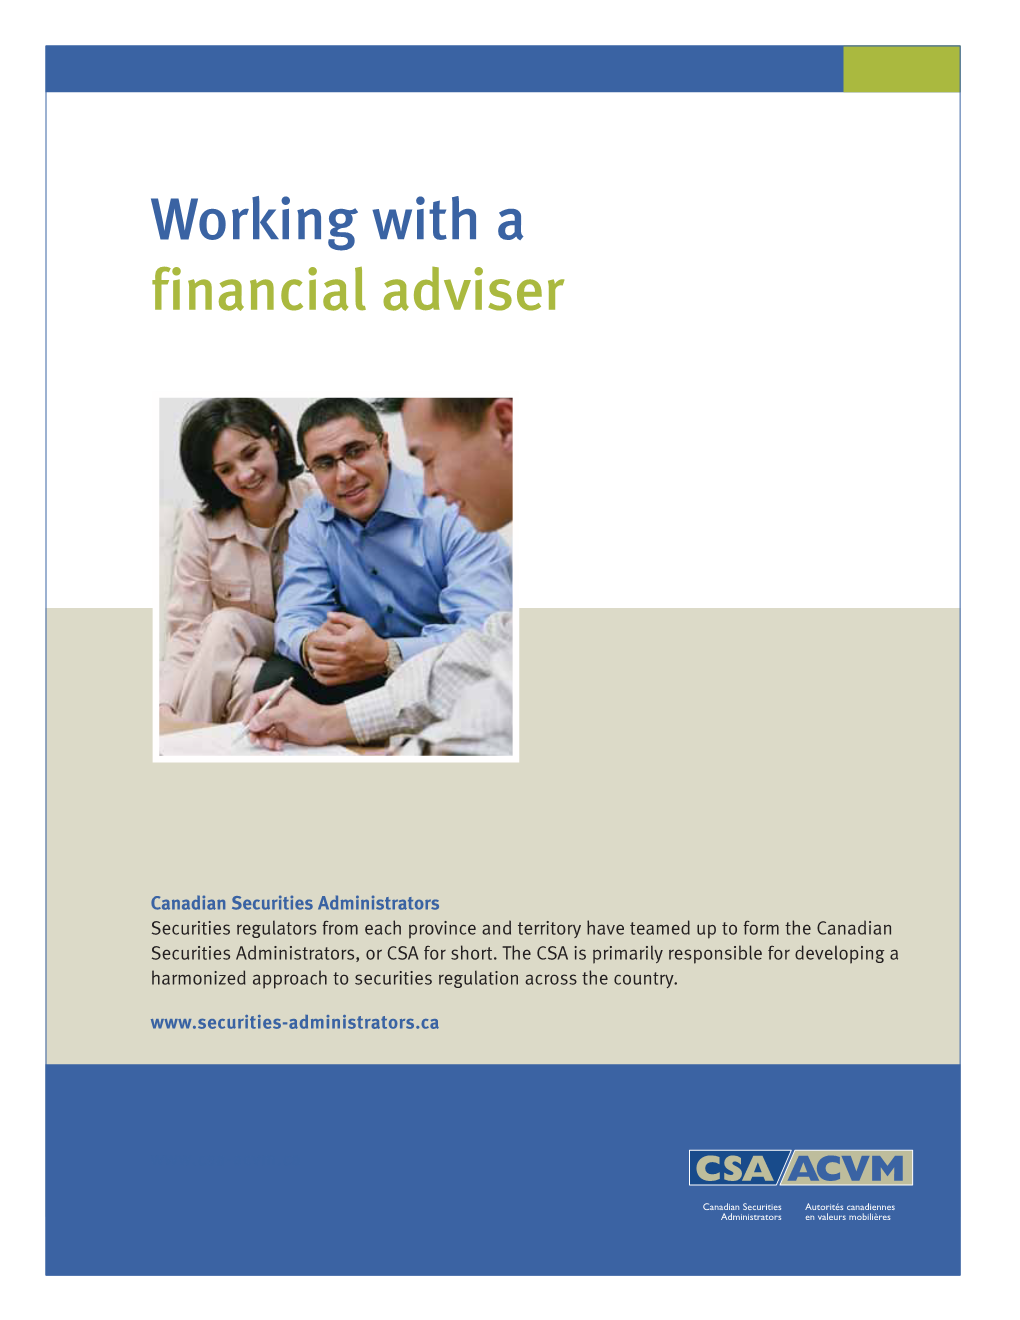 Working with a Financial Adviser